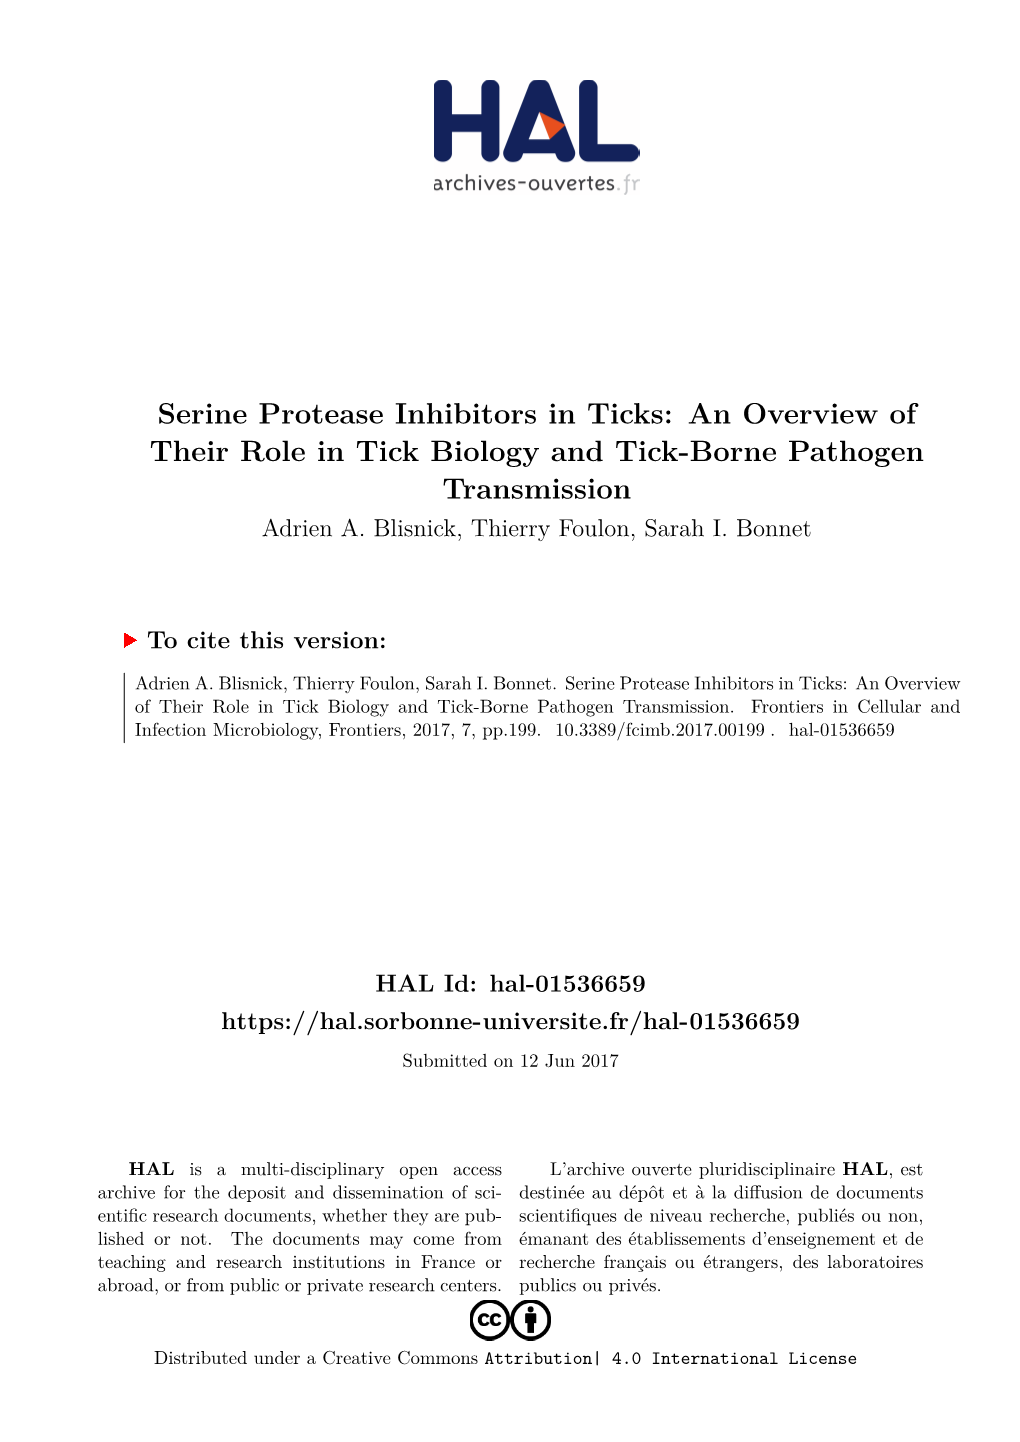 Serine Protease Inhibitors in Ticks: an Overview of Their Role in Tick Biology and Tick-Borne Pathogen Transmission Adrien A